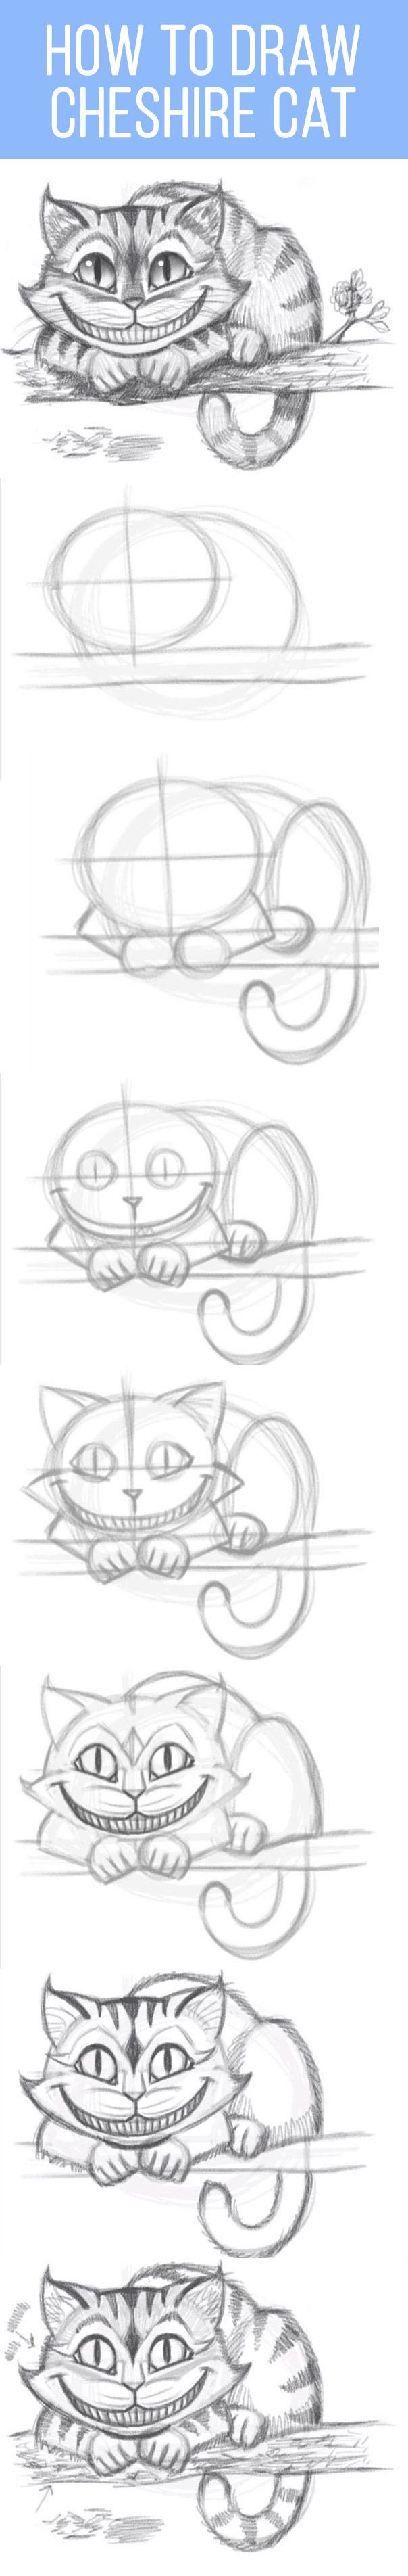 How to draw Cheshire Cat